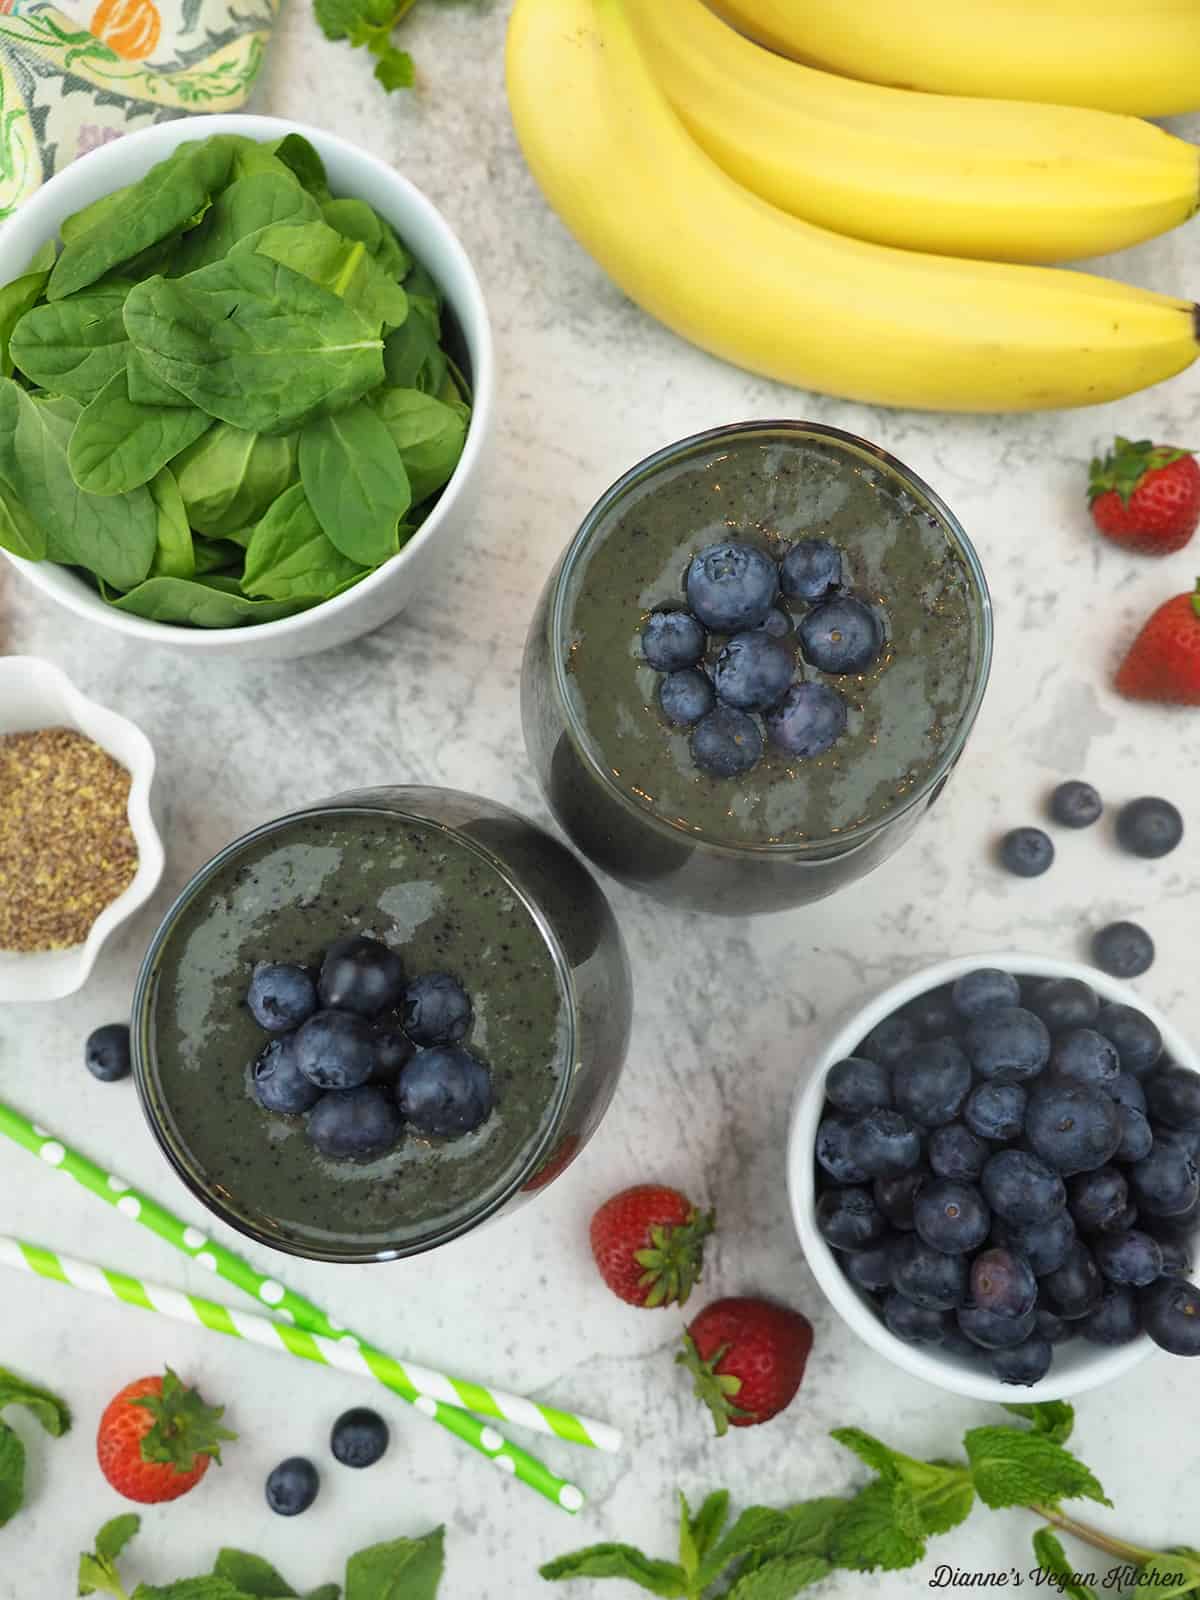 Overhead shot of smoothie with blueberries, bananas, strawberries and a bowl of spinach